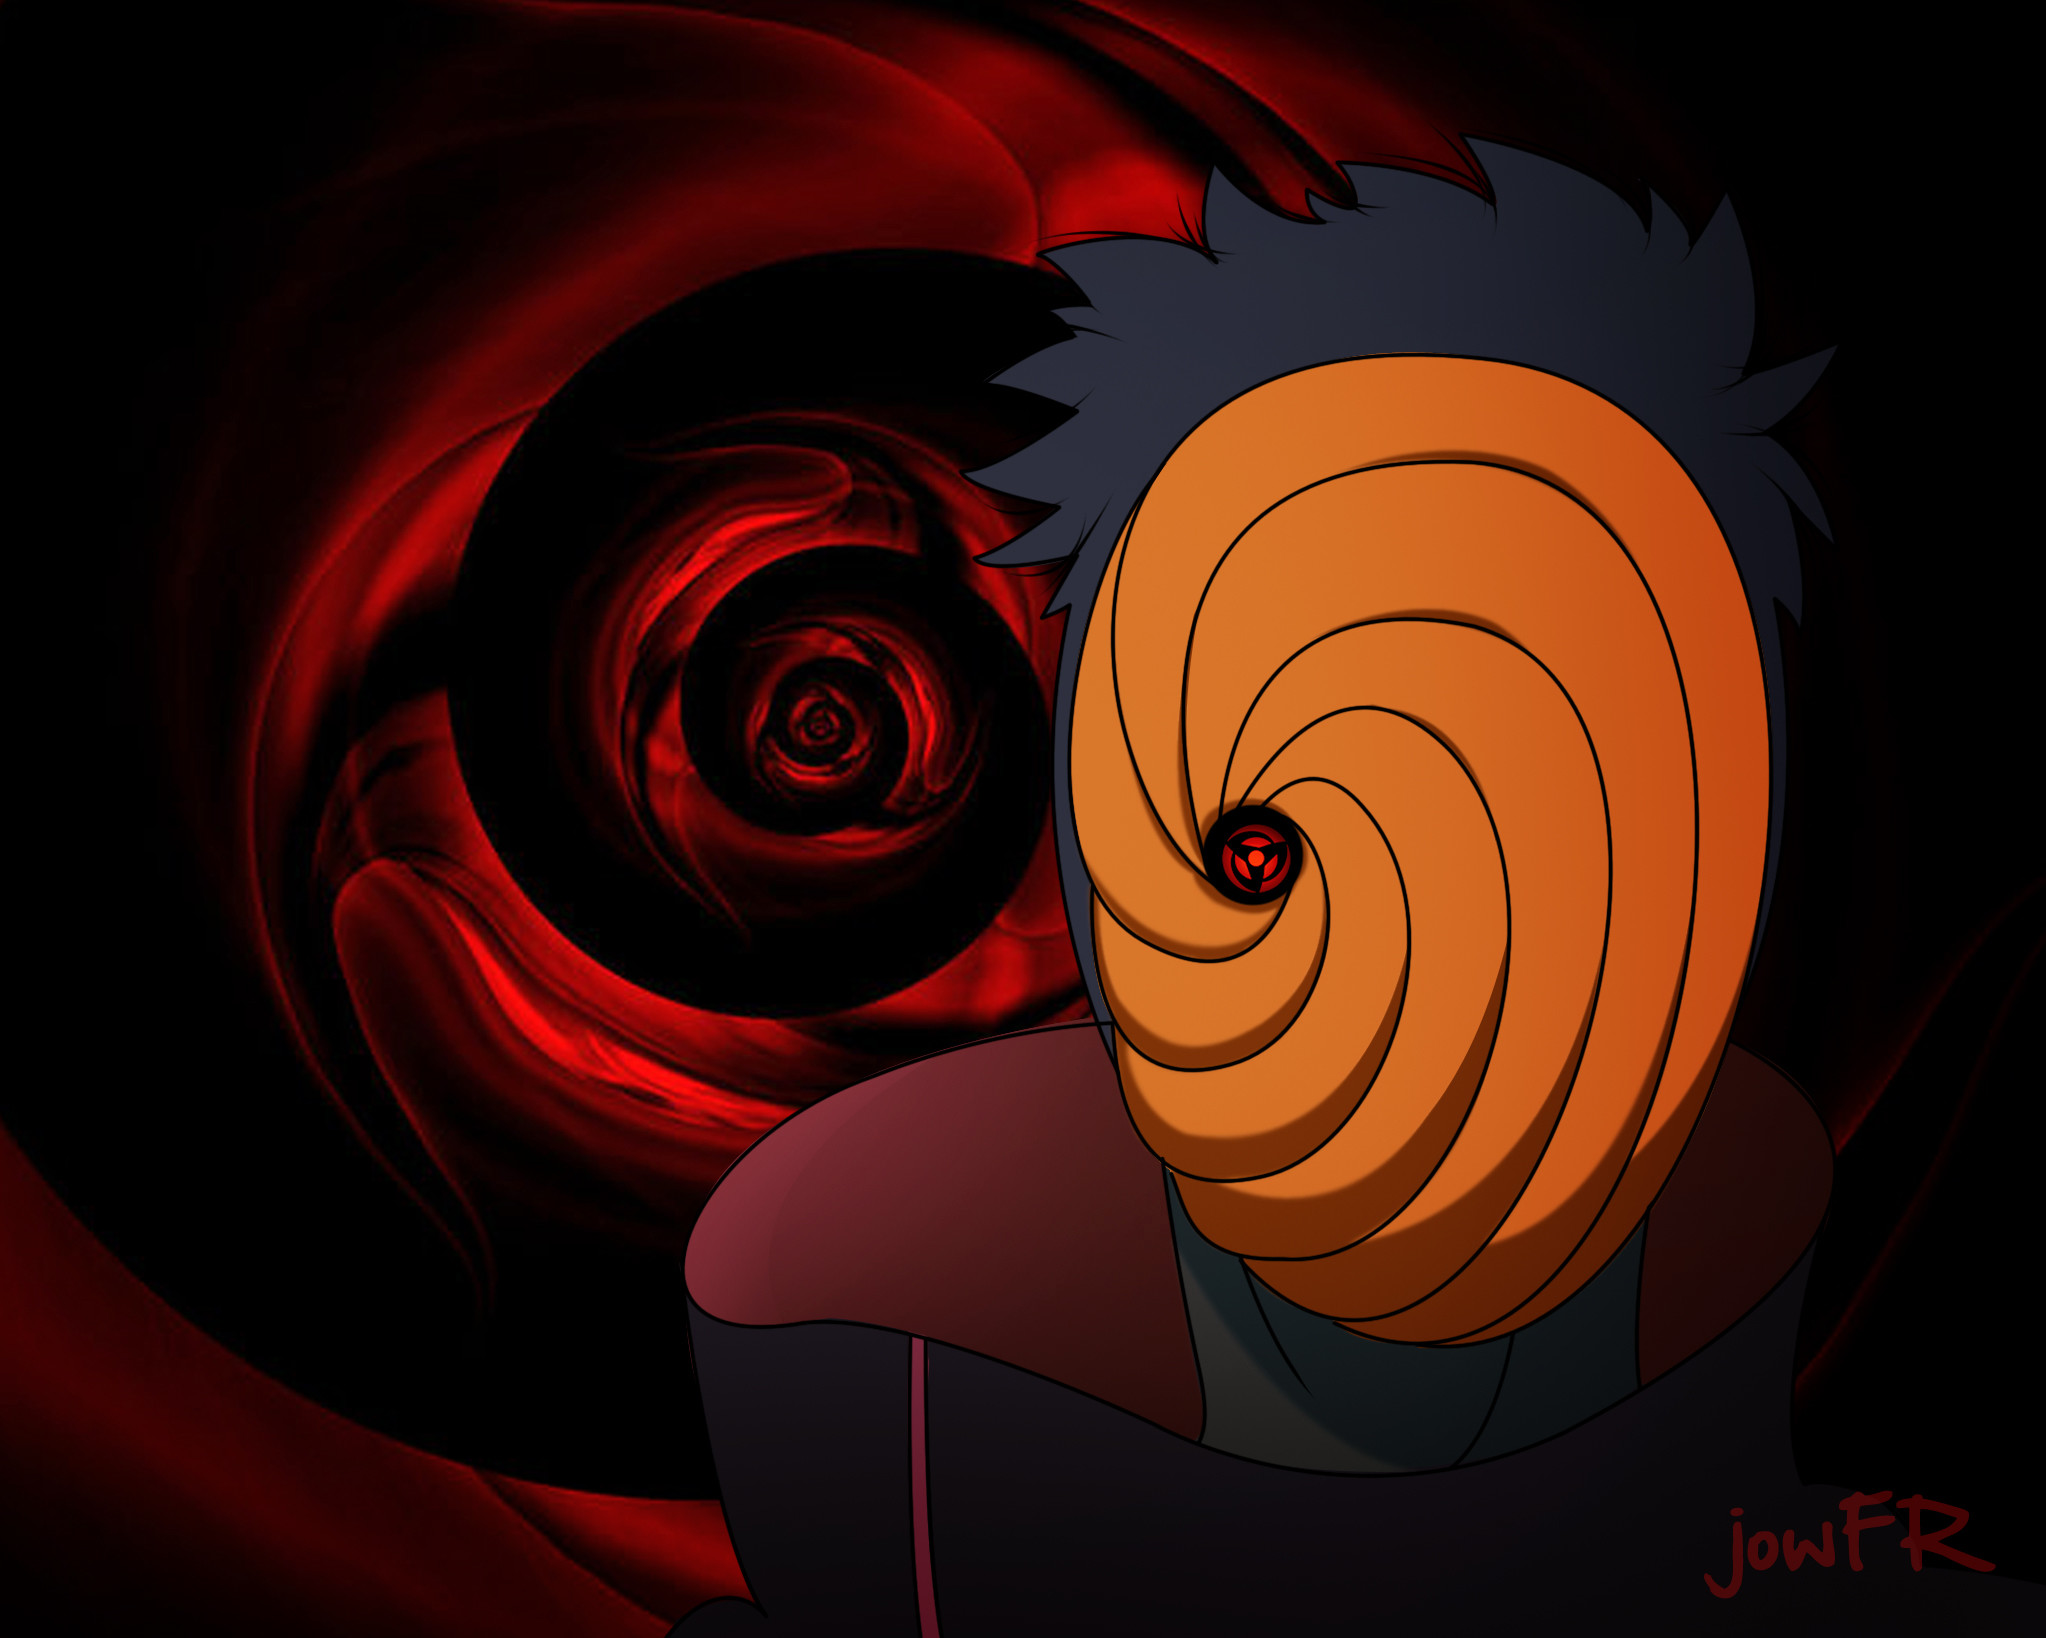 View 6257737 Obito Uchiha Wallpapers, T4.Themes